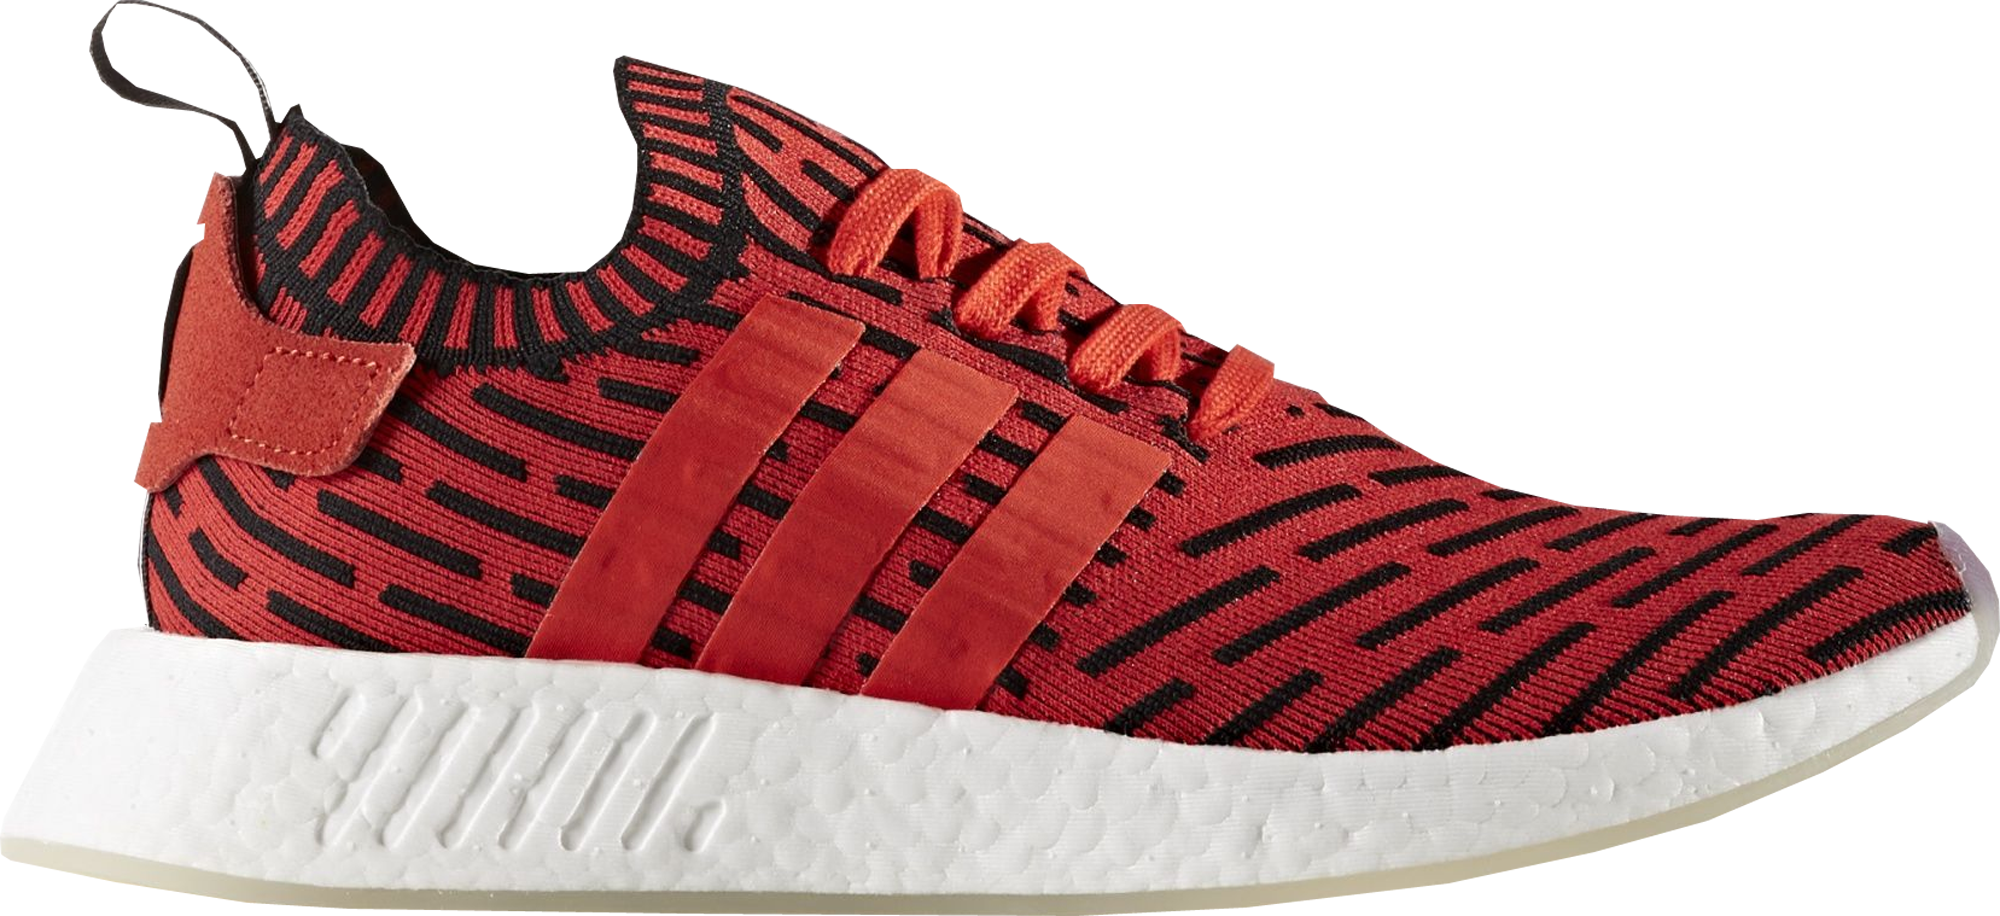 adidas core red